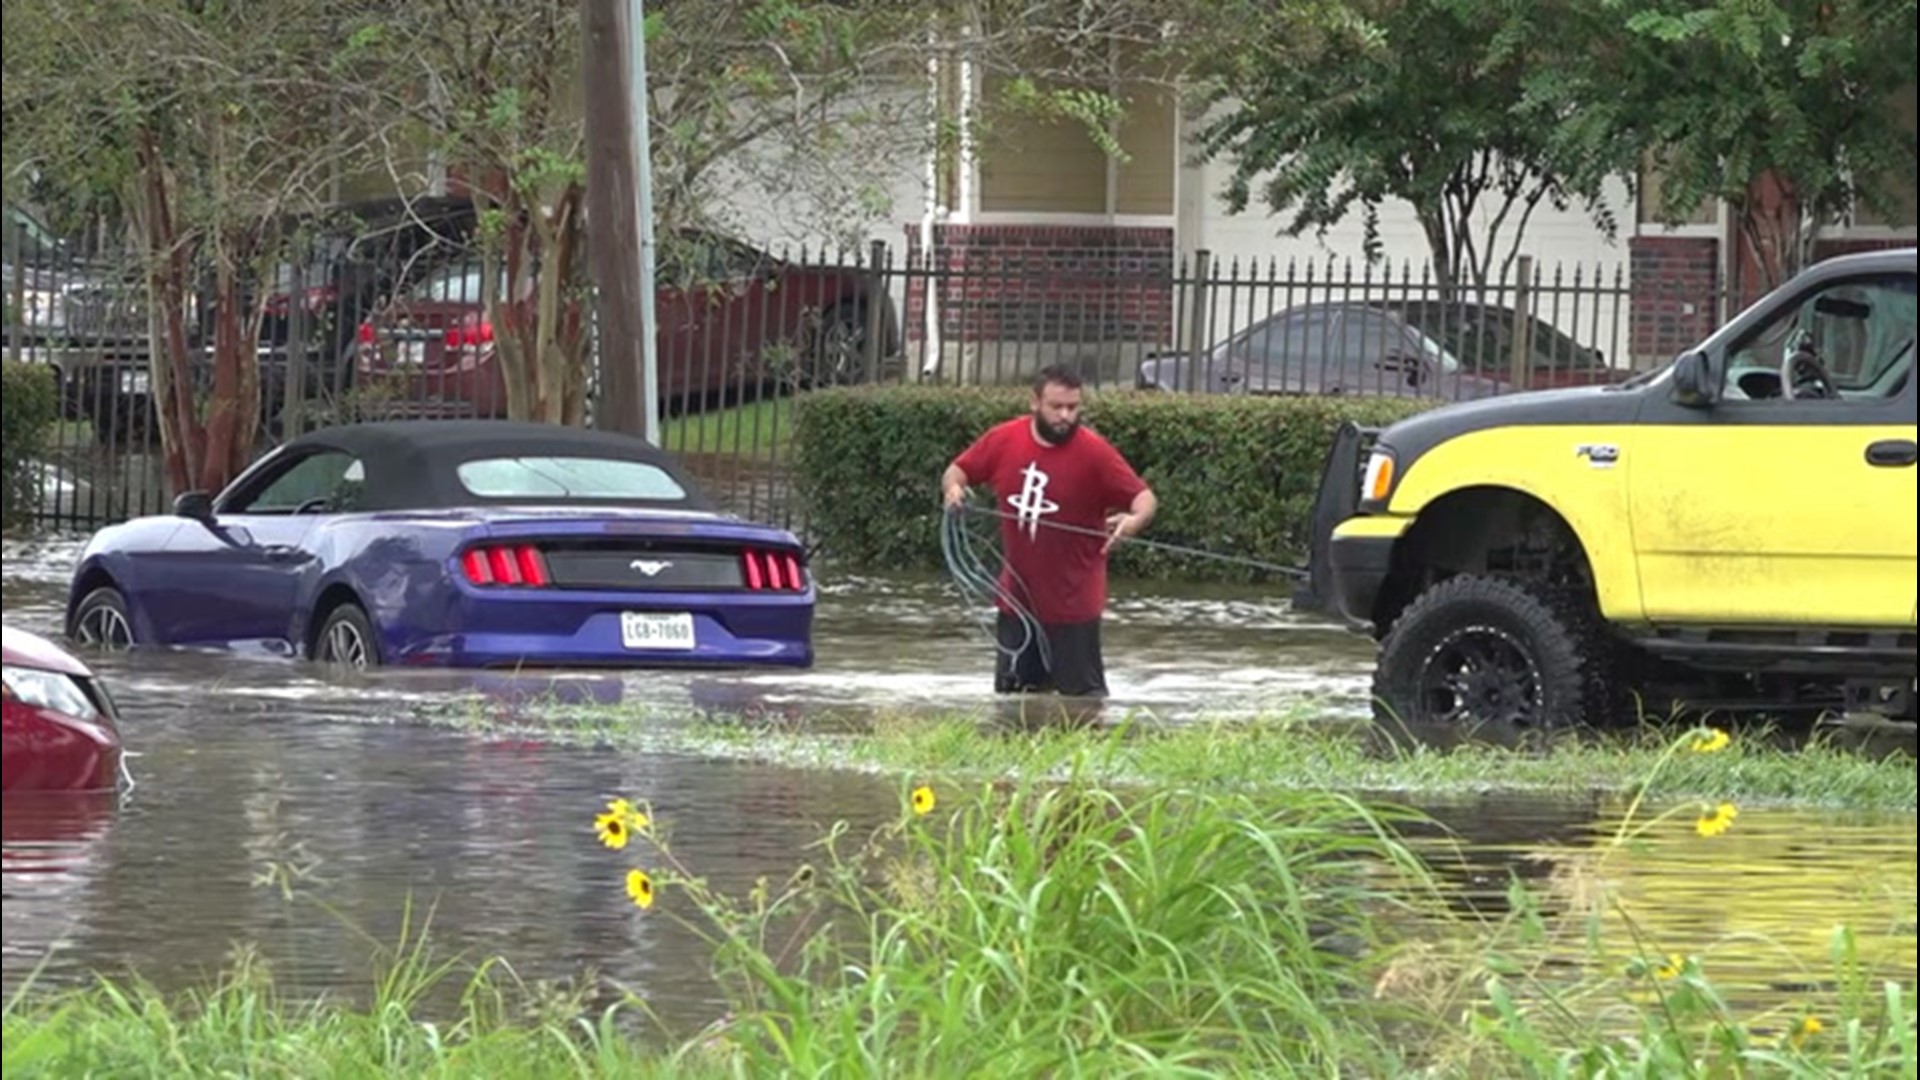 Volunteers in specially equipped vehicles helped those in need as Beta caused flooding in Houston, Texas, on Sept. 22.